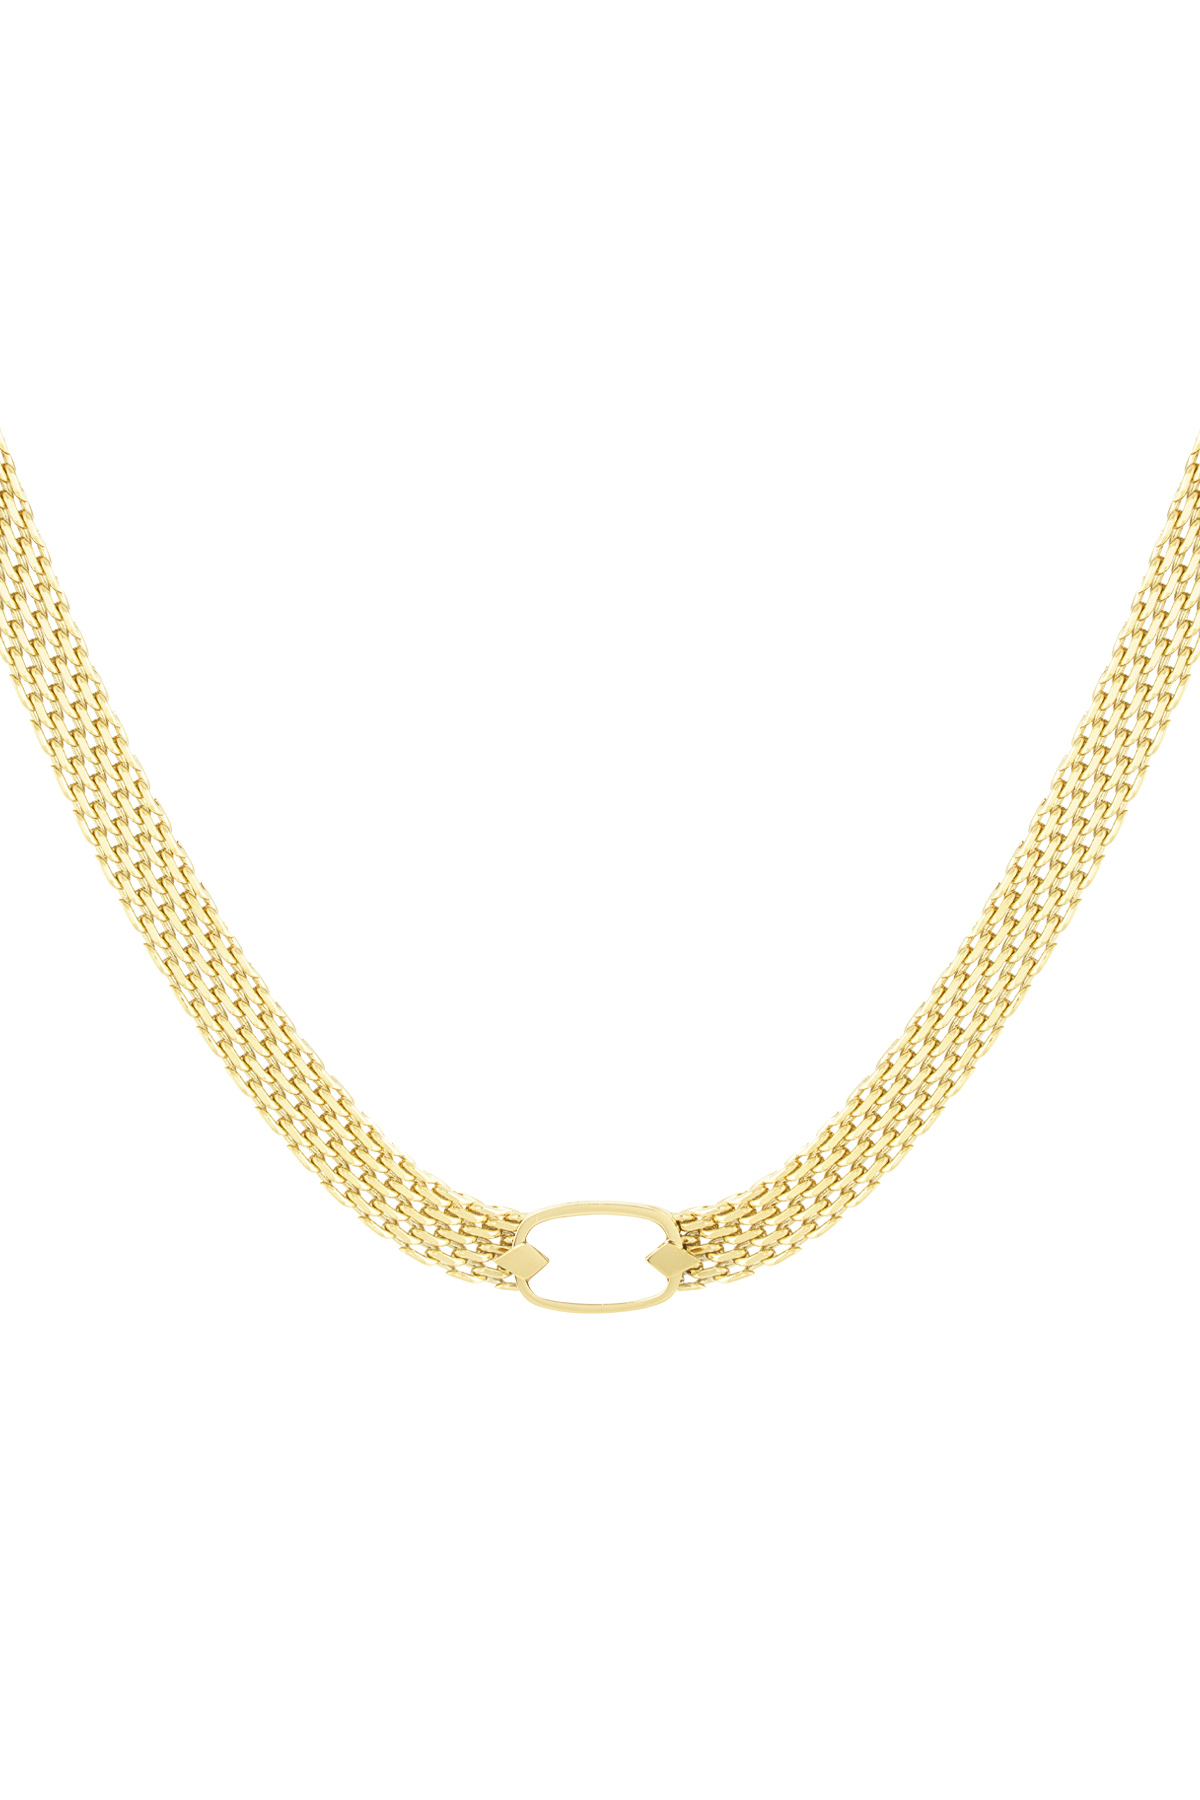 Flat links necklace - gold h5 